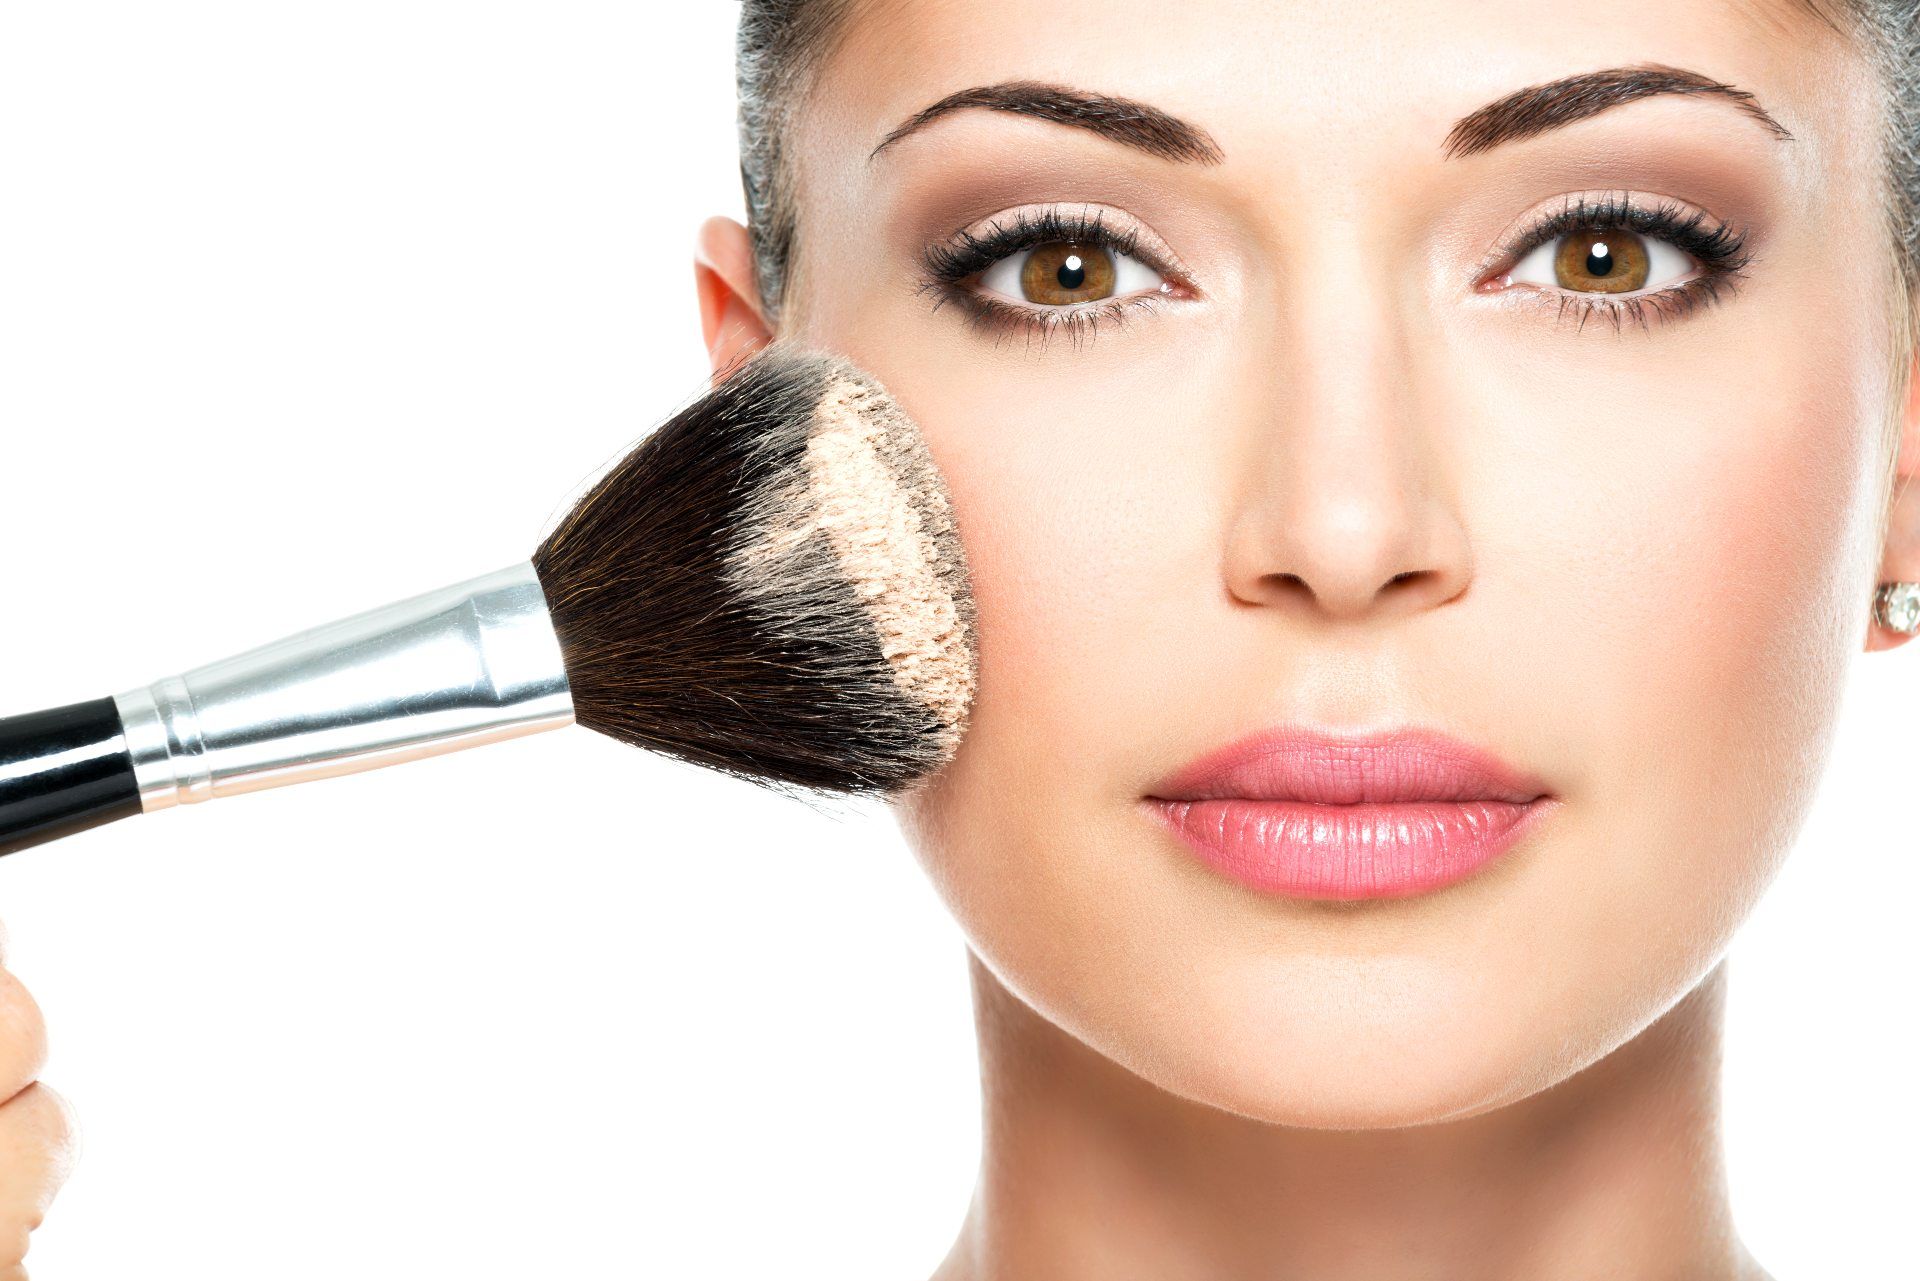 A woman applies foundation with a brush - Maybelline makeup